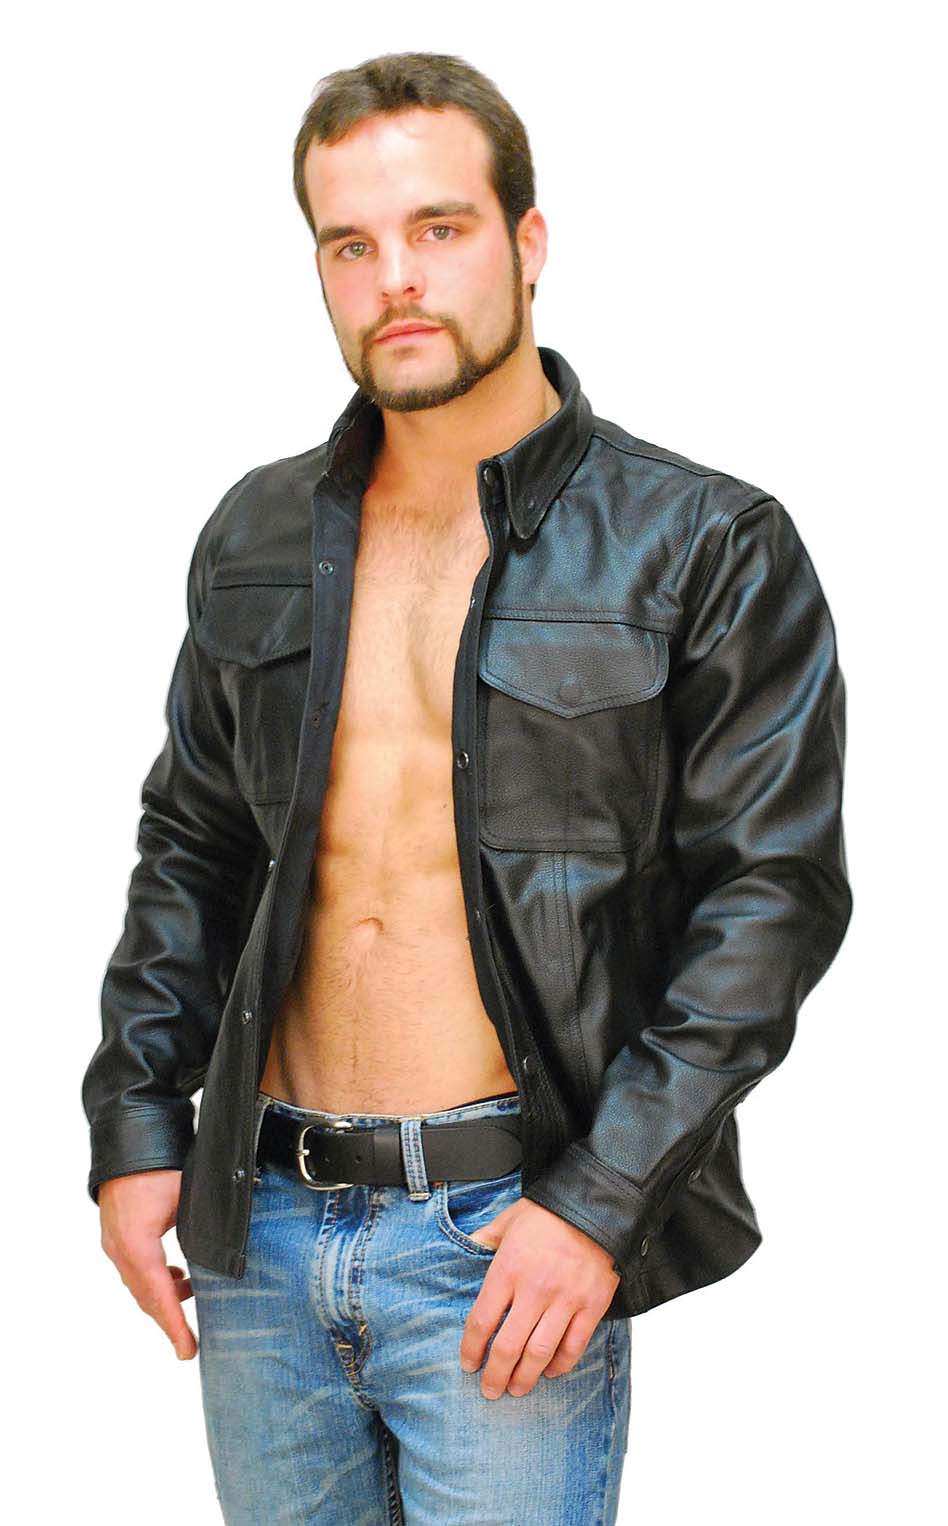 Men's heavy leather shirt or lightweight leather jacket that is economically priced by Jamin Leather.